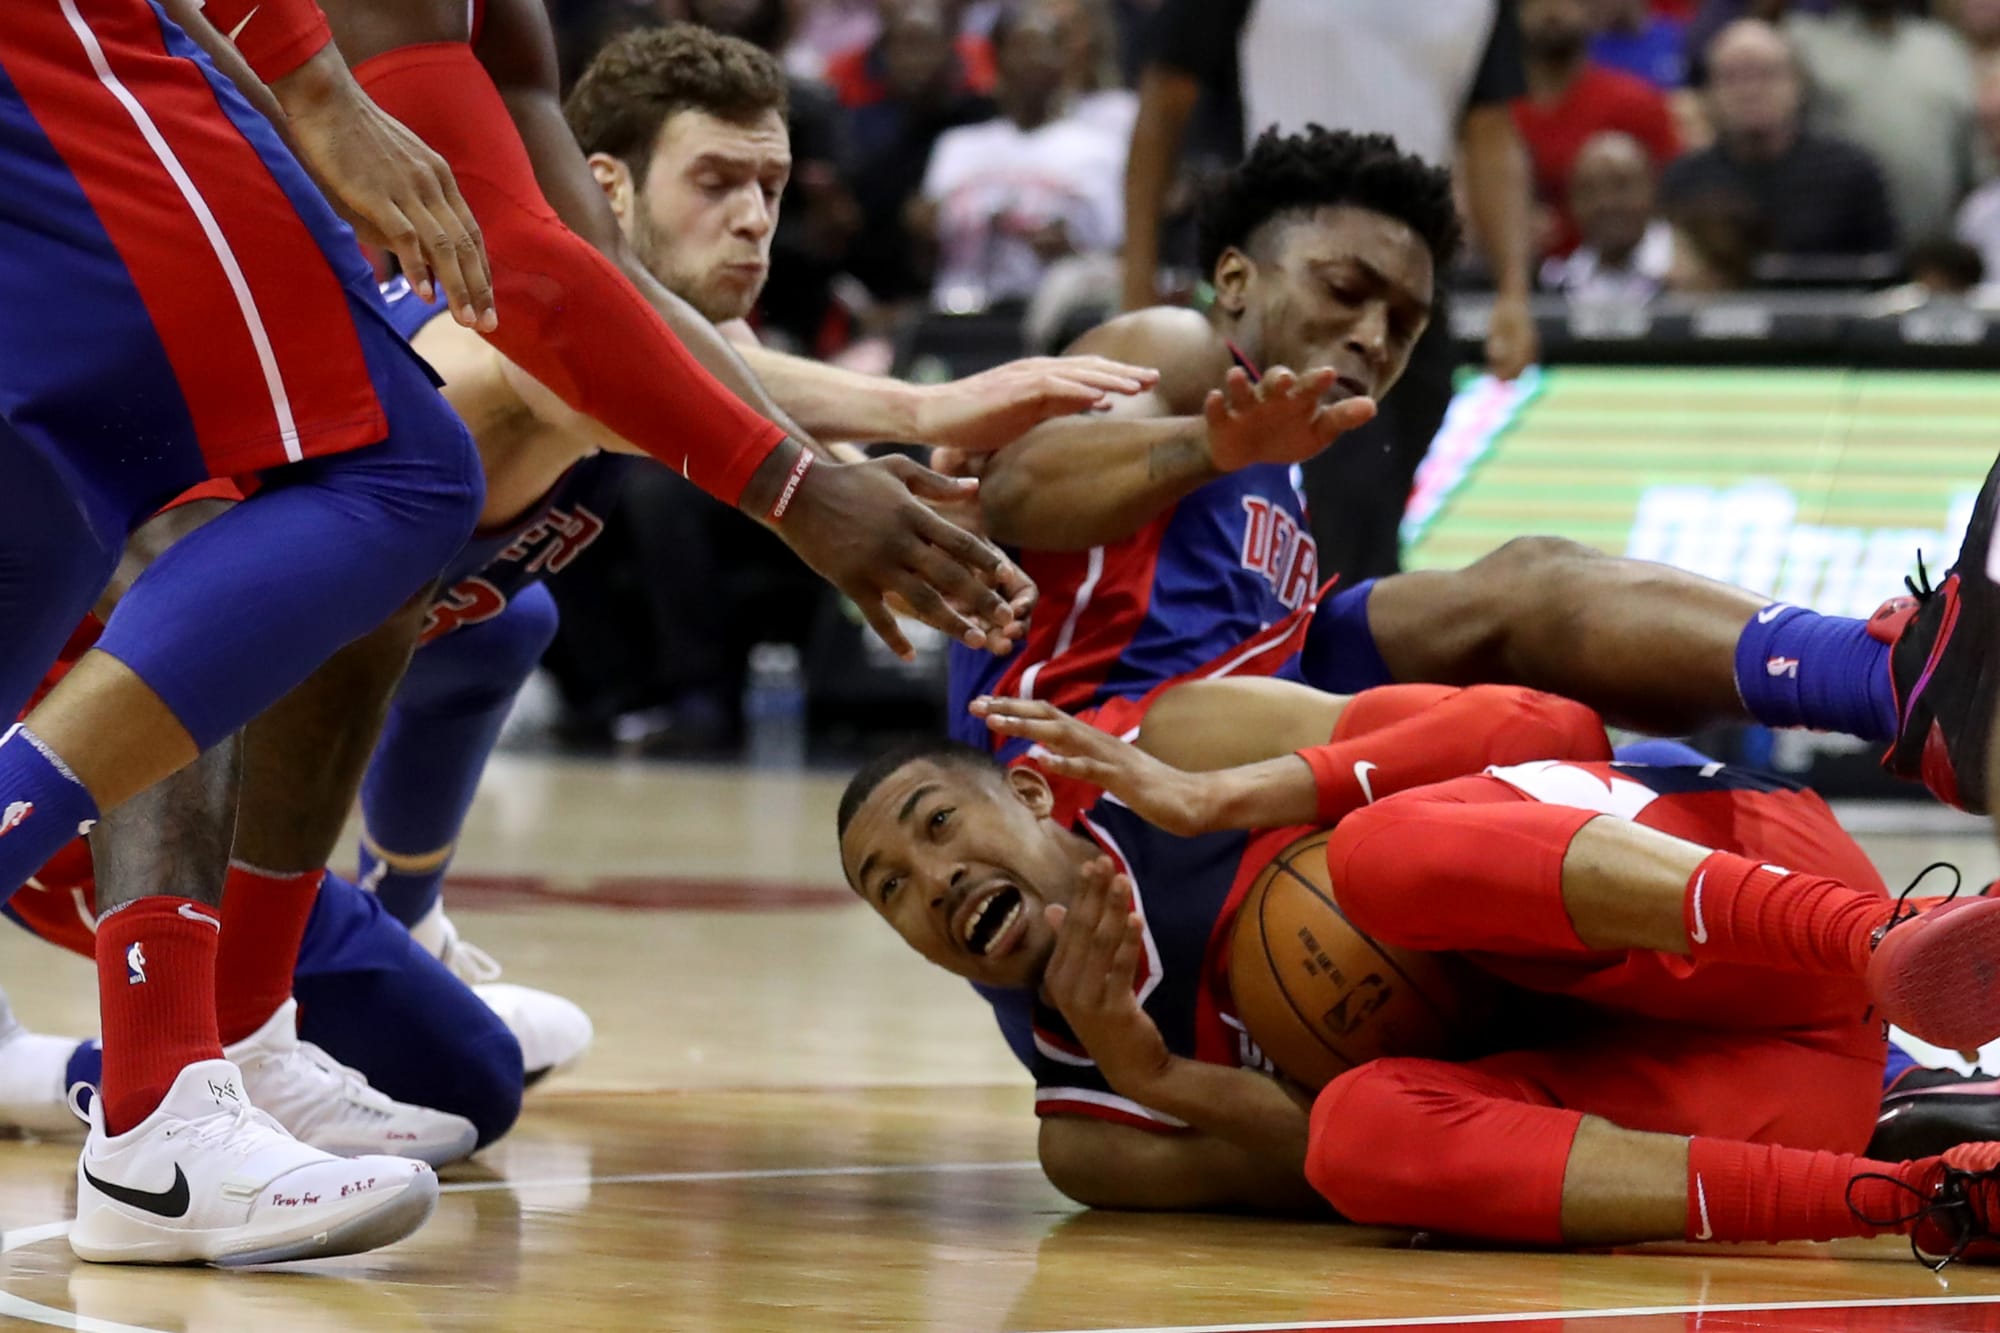 Detroit Pistons fall 115111 in tight contest with Washington Wizards